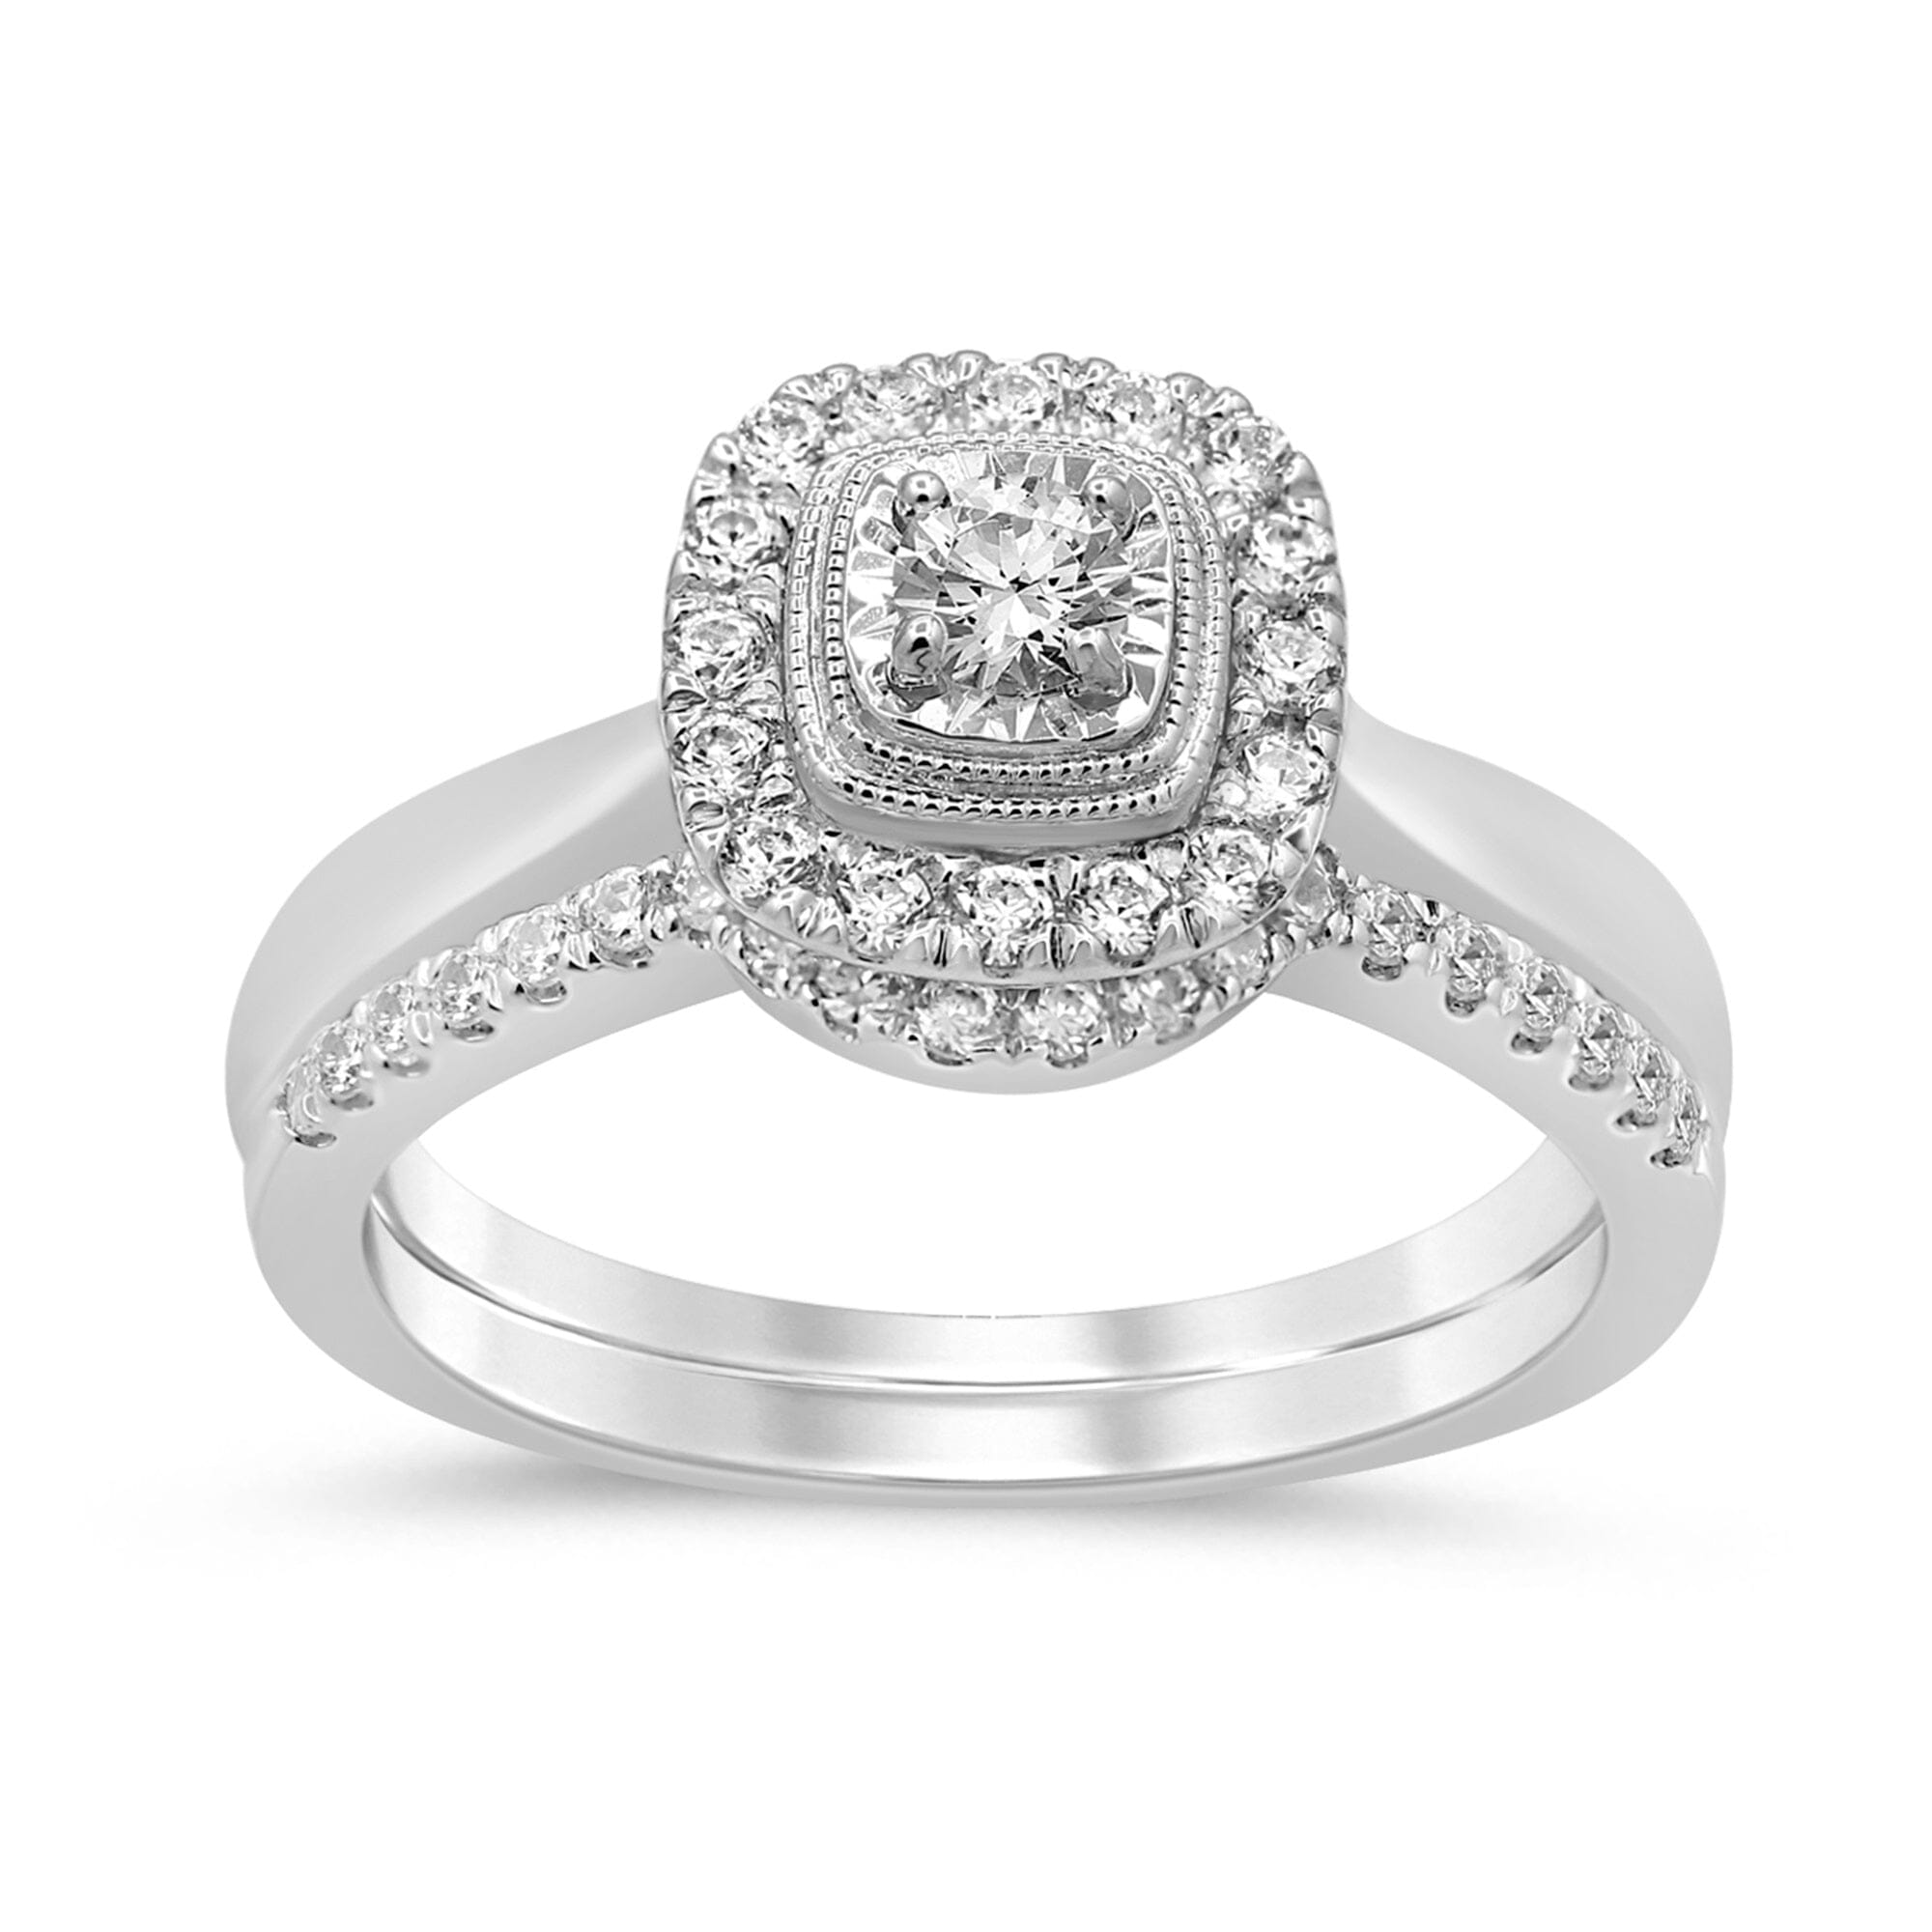 Meera Square Solitaire with 0.50ct of Laboratory Grown Diamonds in 9ct White Gold Rings Bevilles 